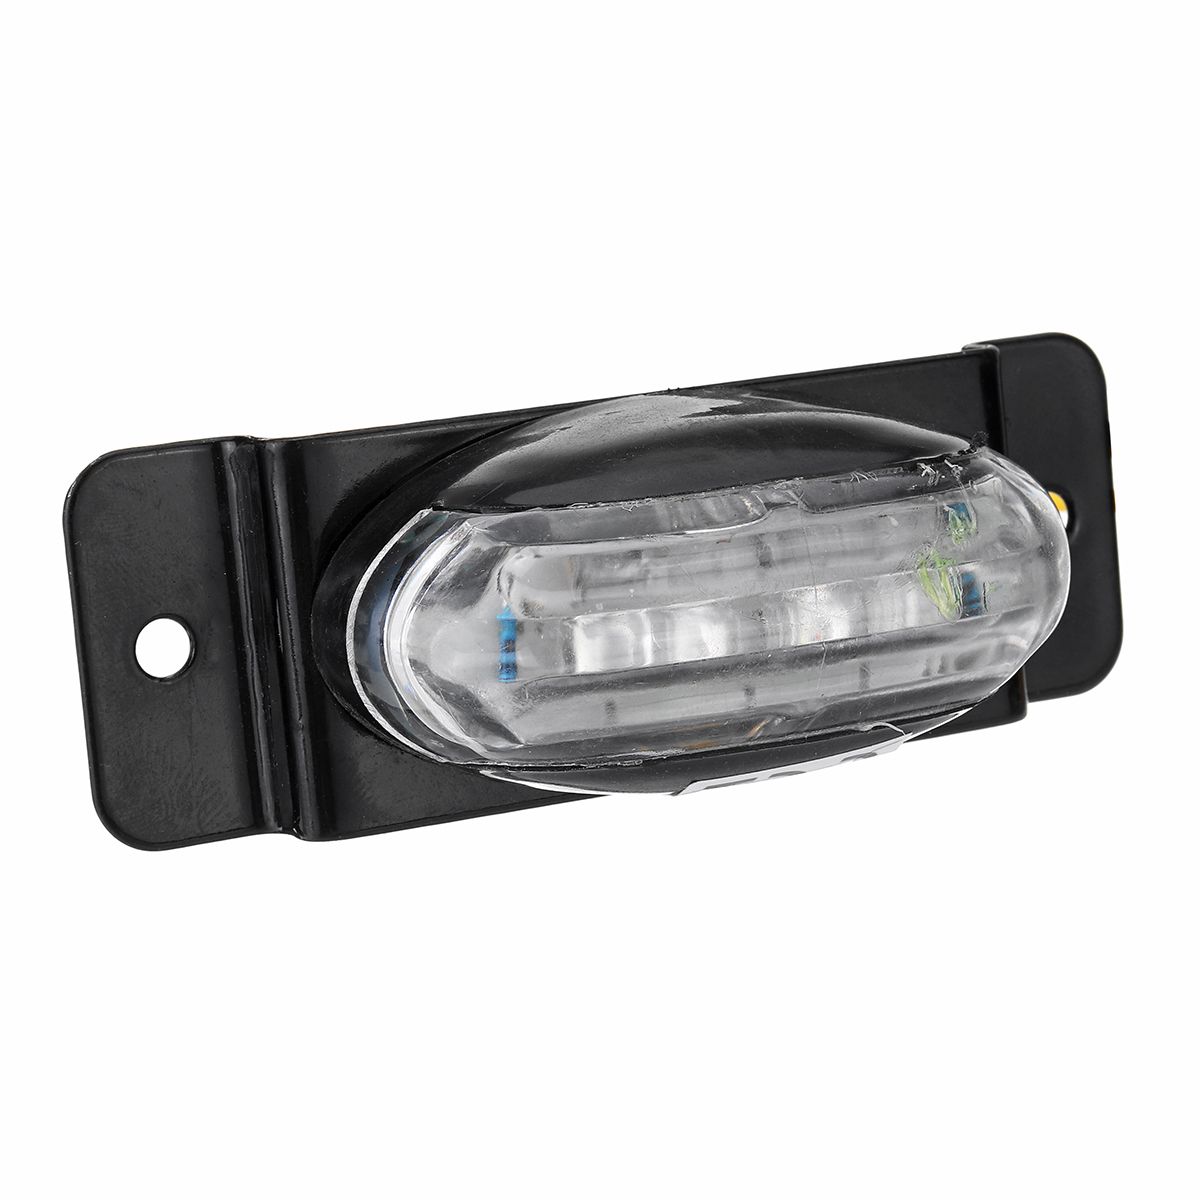 Yellow-24V-LED-Side-Marker-Lights-License-Plate-Lamp-Piranha-Style-with-stand-for-Truck-Trailer-1520445